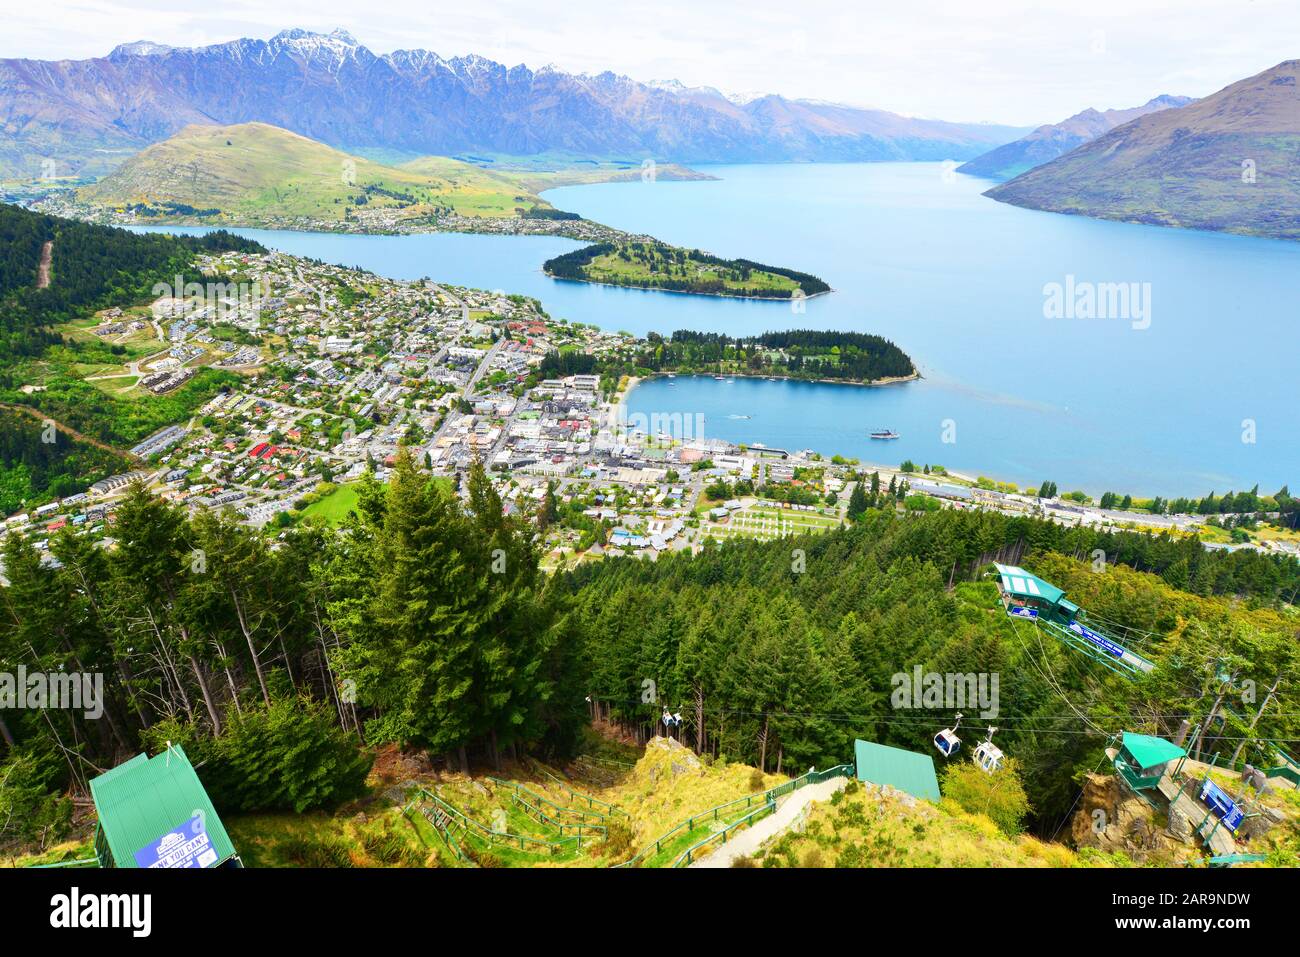 QUEENSTOWN, NZ - NOV 17:Visitors in Queenstown on Nov 17 2014.It's one of the most popular travel destination in New Zealand known for it's restaurant Stock Photo